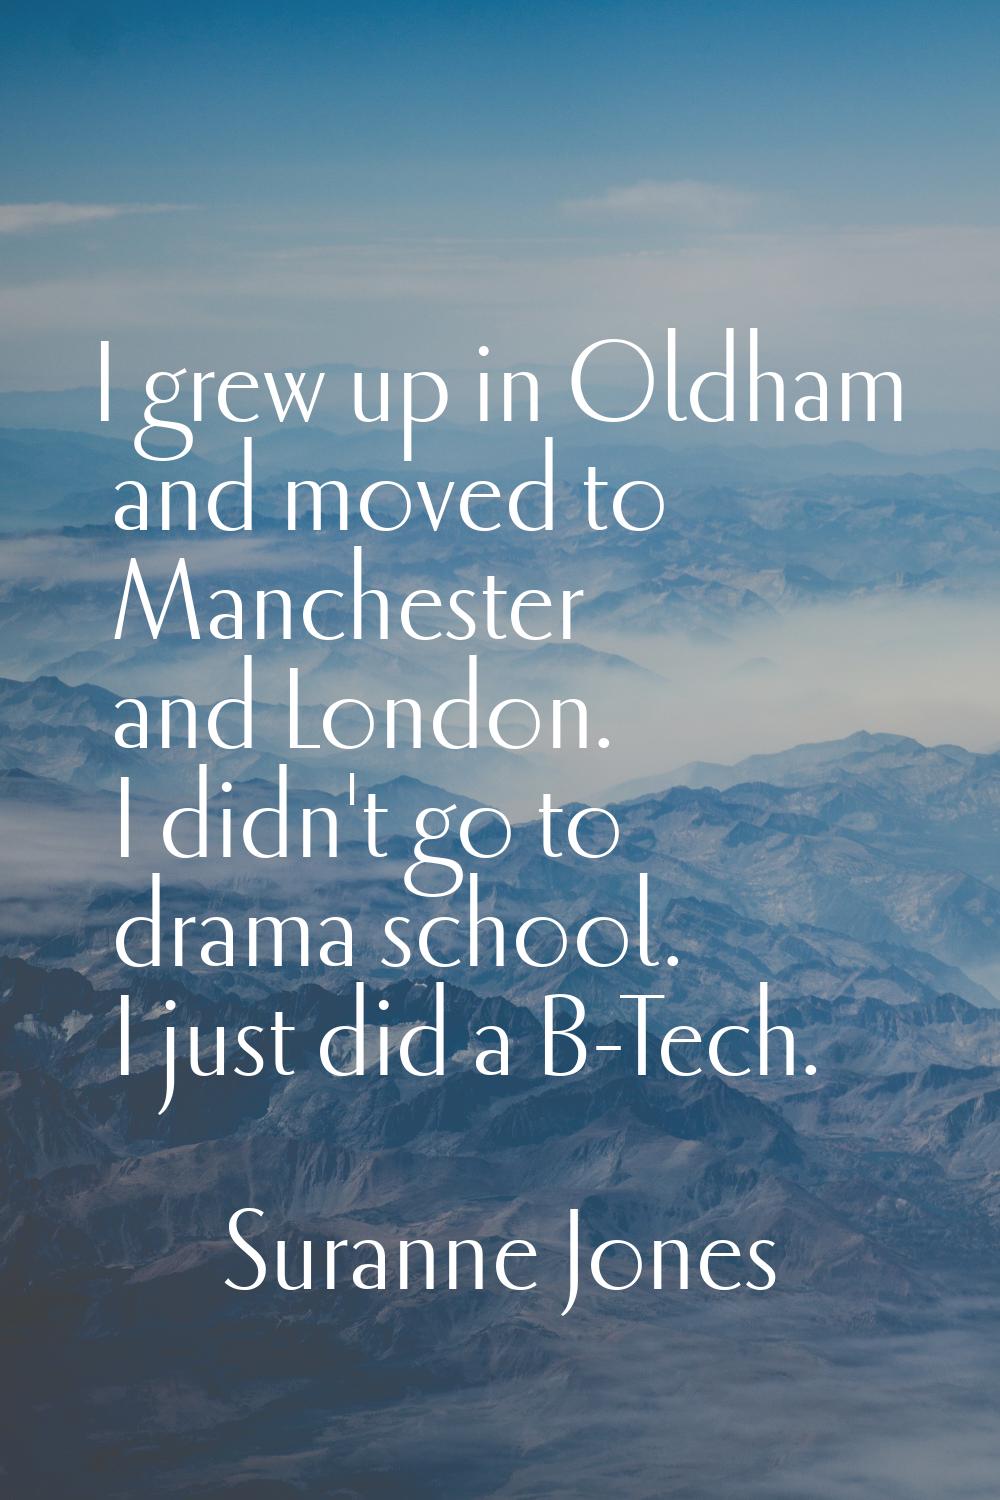 I grew up in Oldham and moved to Manchester and London. I didn't go to drama school. I just did a B